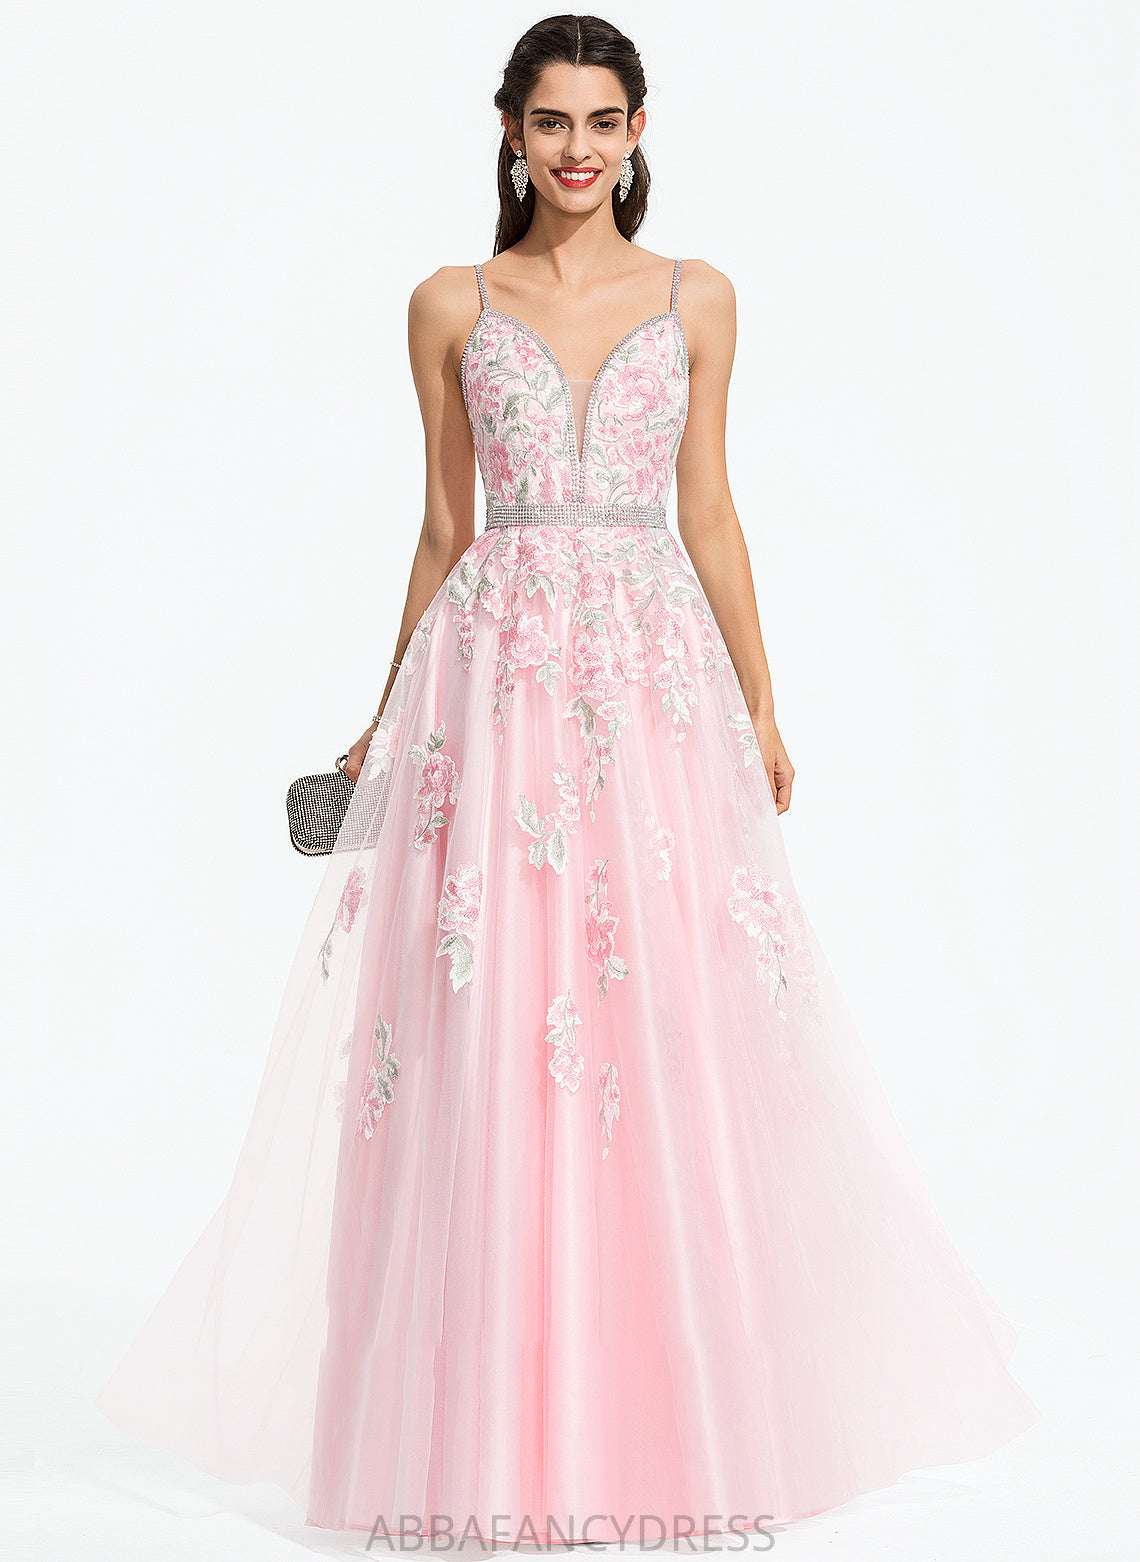 Micah Tulle V-neck With Sequins Prom Dresses Beading Ball-Gown/Princess Floor-Length